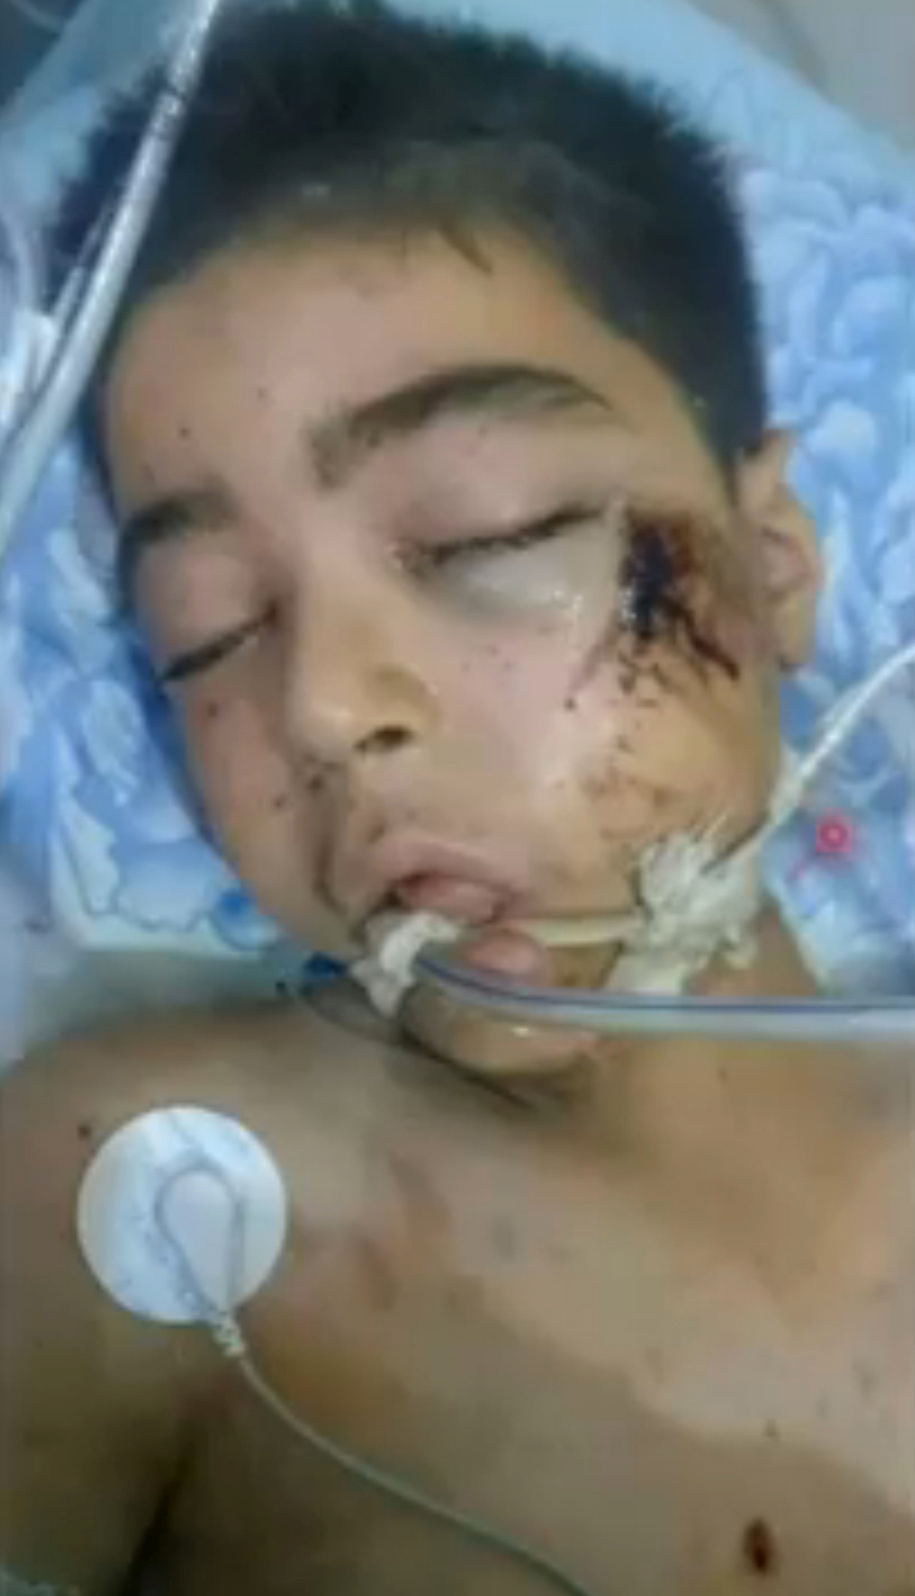 A still image taken on Aug. 21, 2016, from a video uploaded by the Aleppo Media Center shows Ali Daqneesh, the 10-year-old brother of Omran Daqneesh, in a hospital bed in Aleppo shortly before his death.